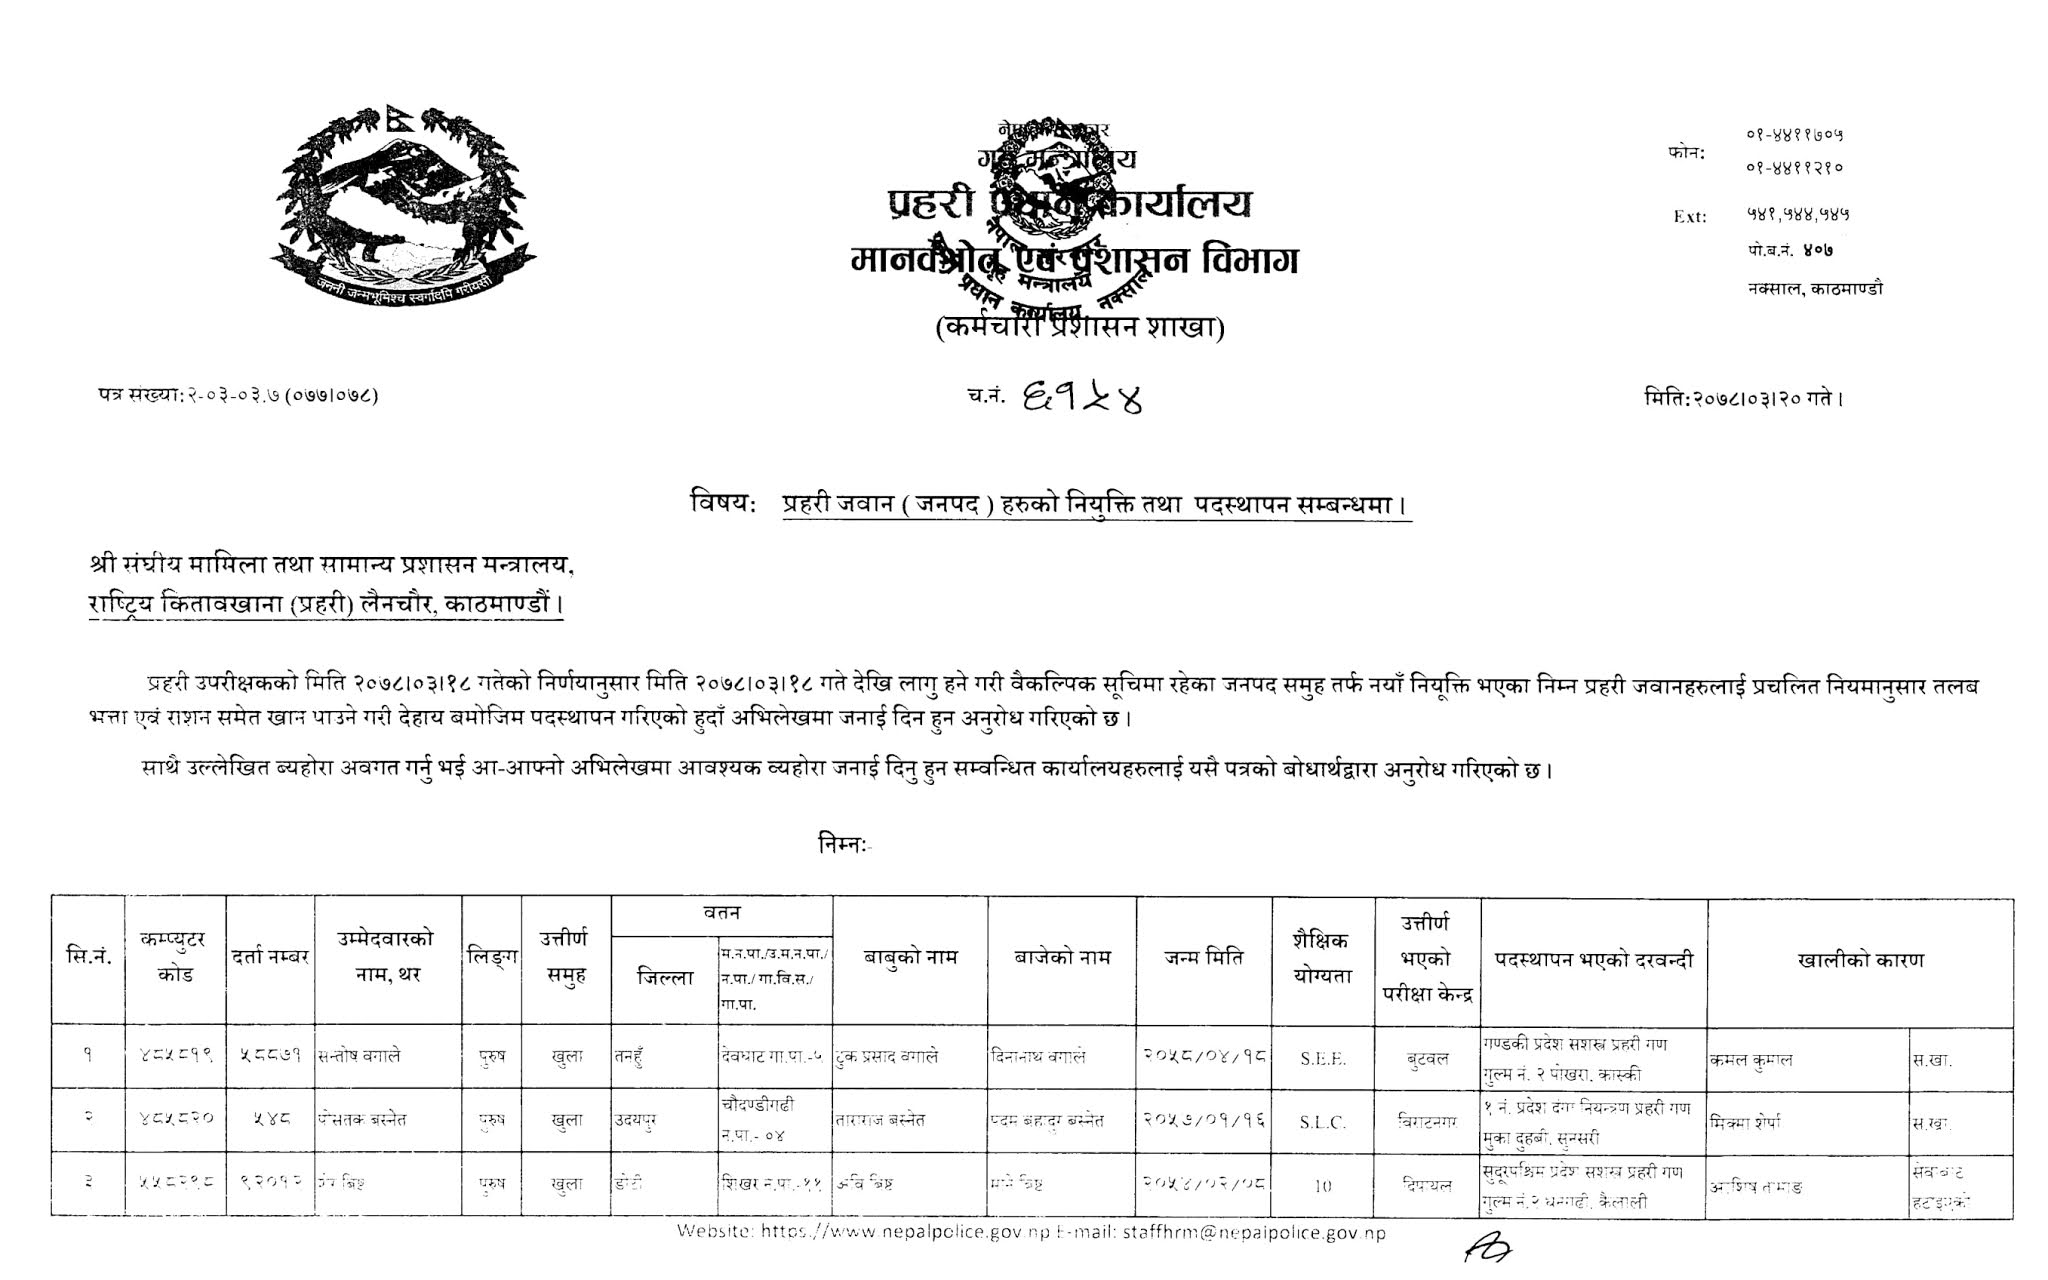 Police Constable Appointment & Posting List: